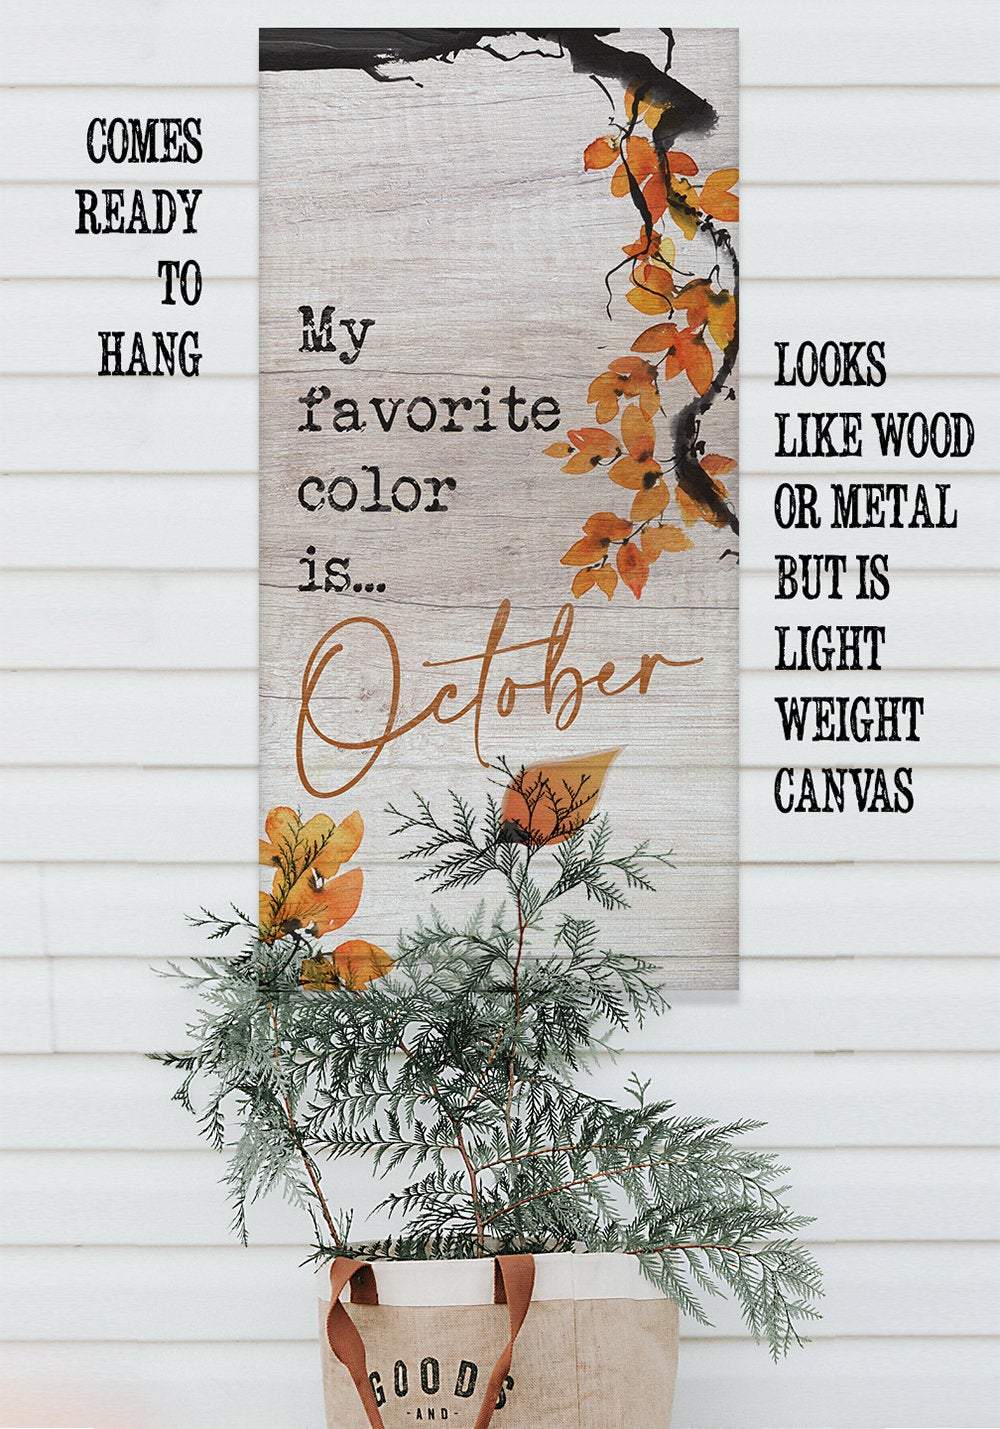 My Favorite Color is October - Canvas | Lone Star Art.